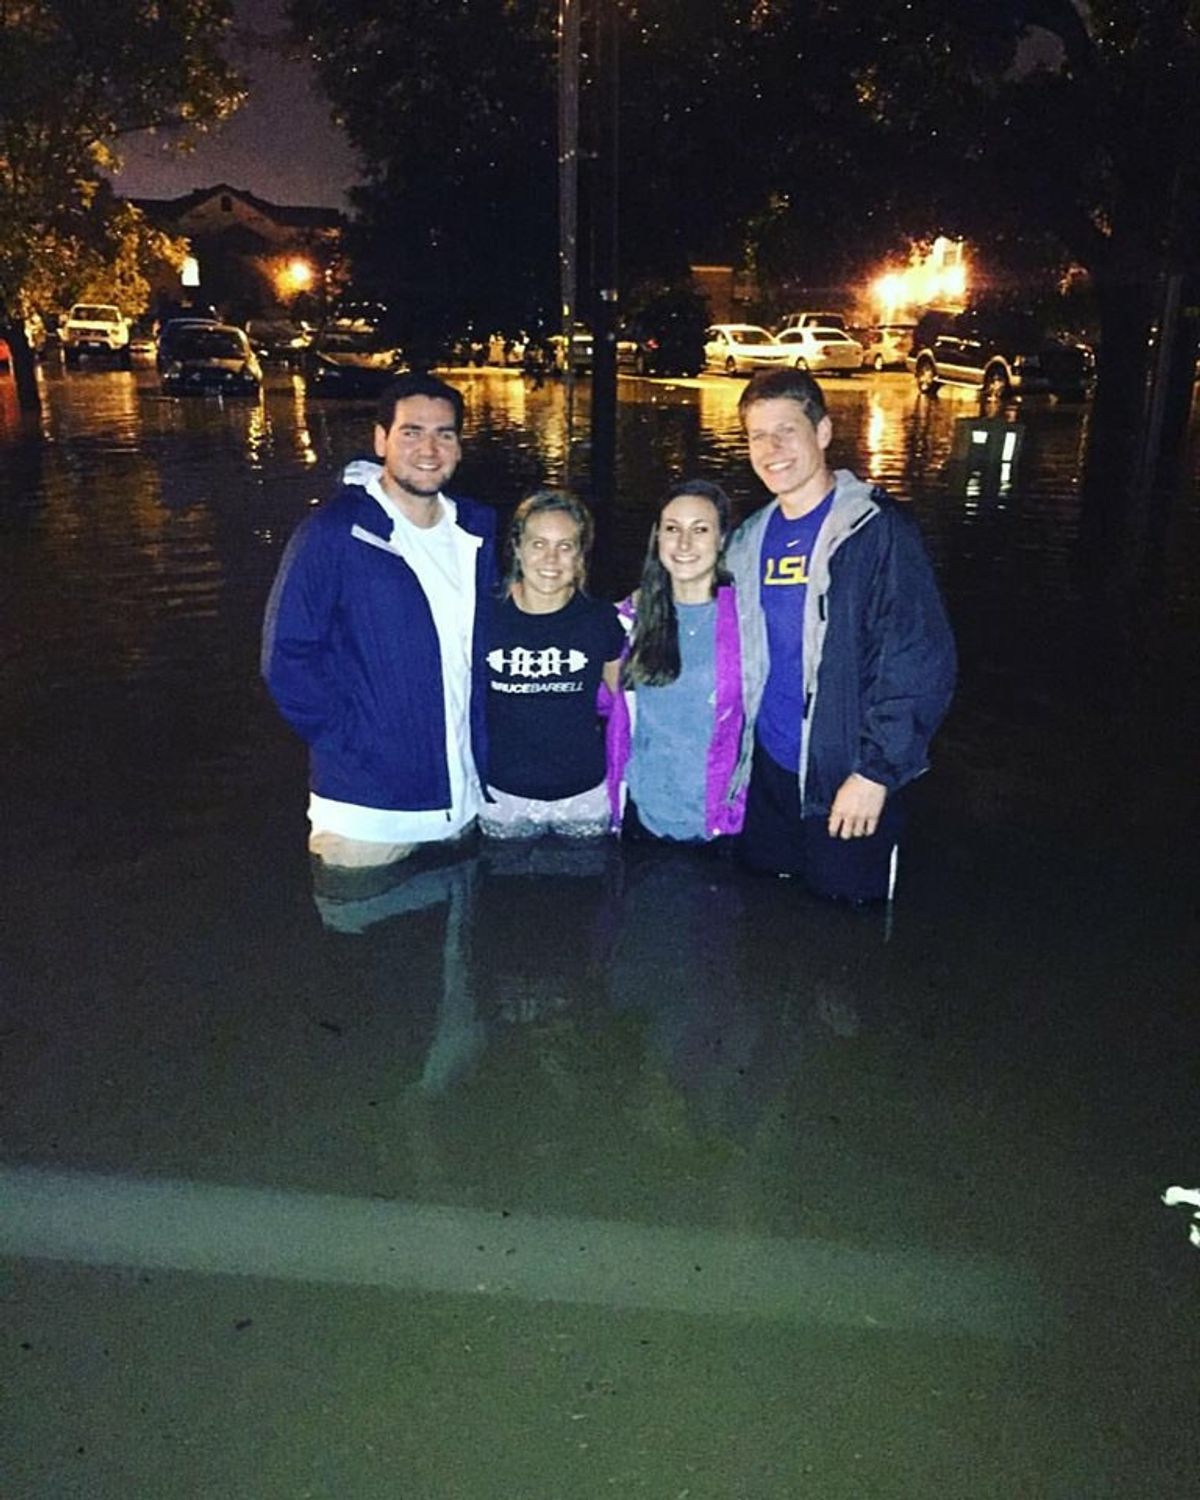 Is LSU Endangering Student's By Not Canceling Classes?